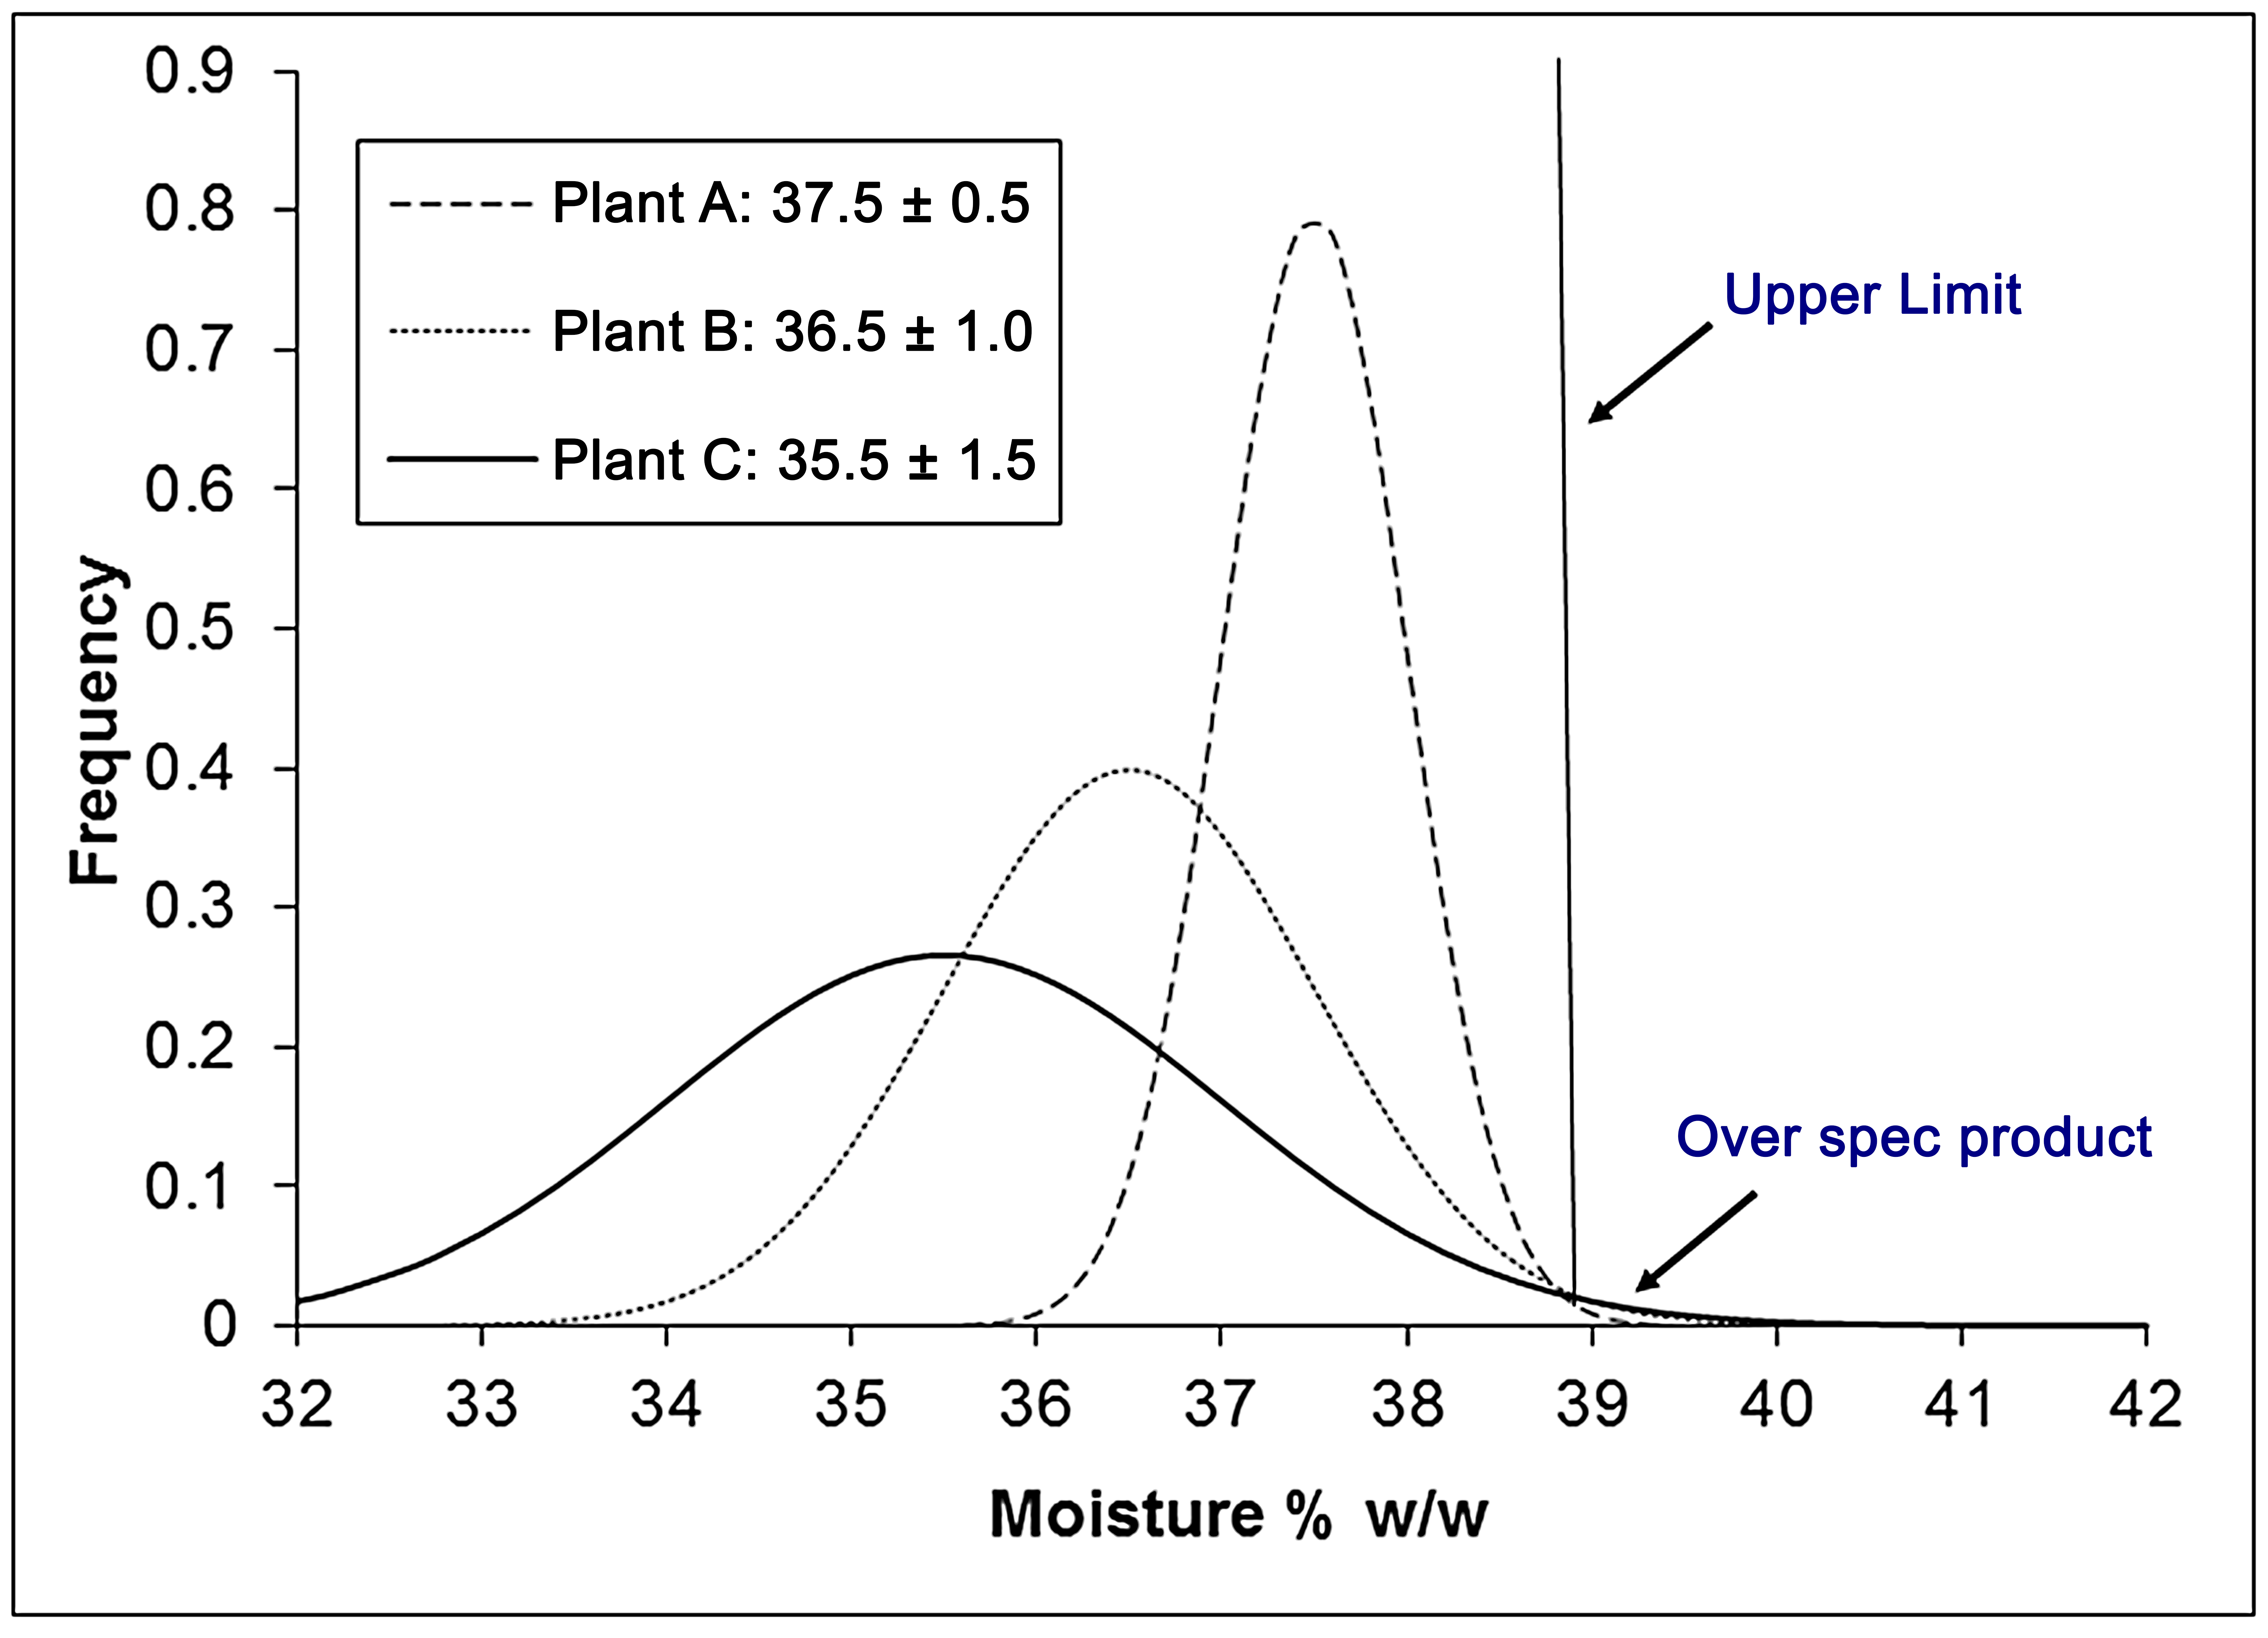 A graph showing 3 different curves. One curve represents the moisture control of Plant A, which has a tall peak frequency, a large mean moisture percent by weight, and a standard deviation of 0.5. A second curve represents Plant B with a medium peak, a medium mean moisture level by weight, and a standard deviation of 1.0. The last curve represents Plant C and it has the smallest peak, the smallest mean moisture percentage, and a standard deviation of 1.5..